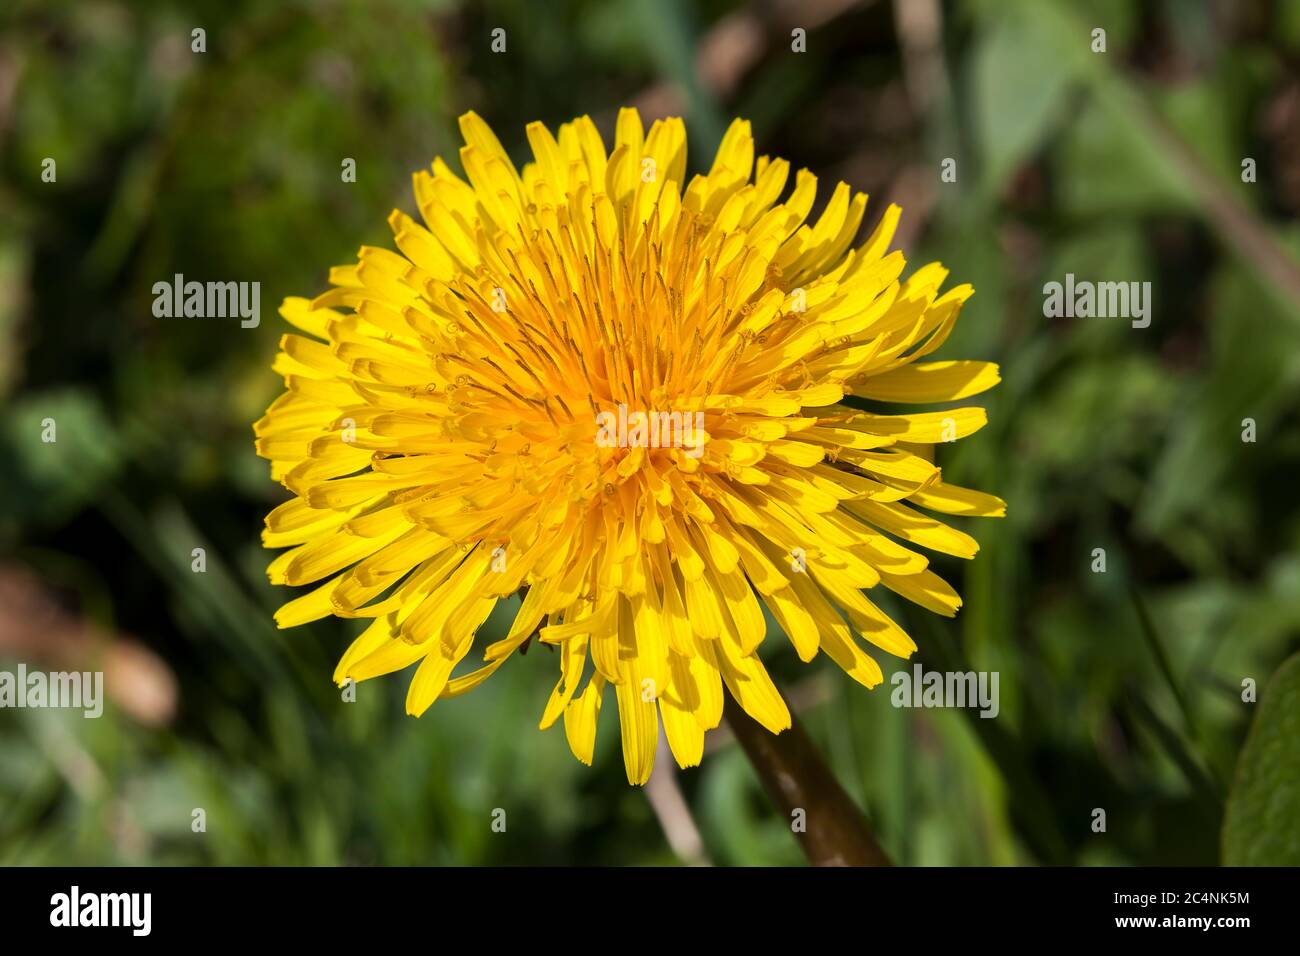 119 Stubborn Weed Images, Stock Photos, 3D objects, & Vectors